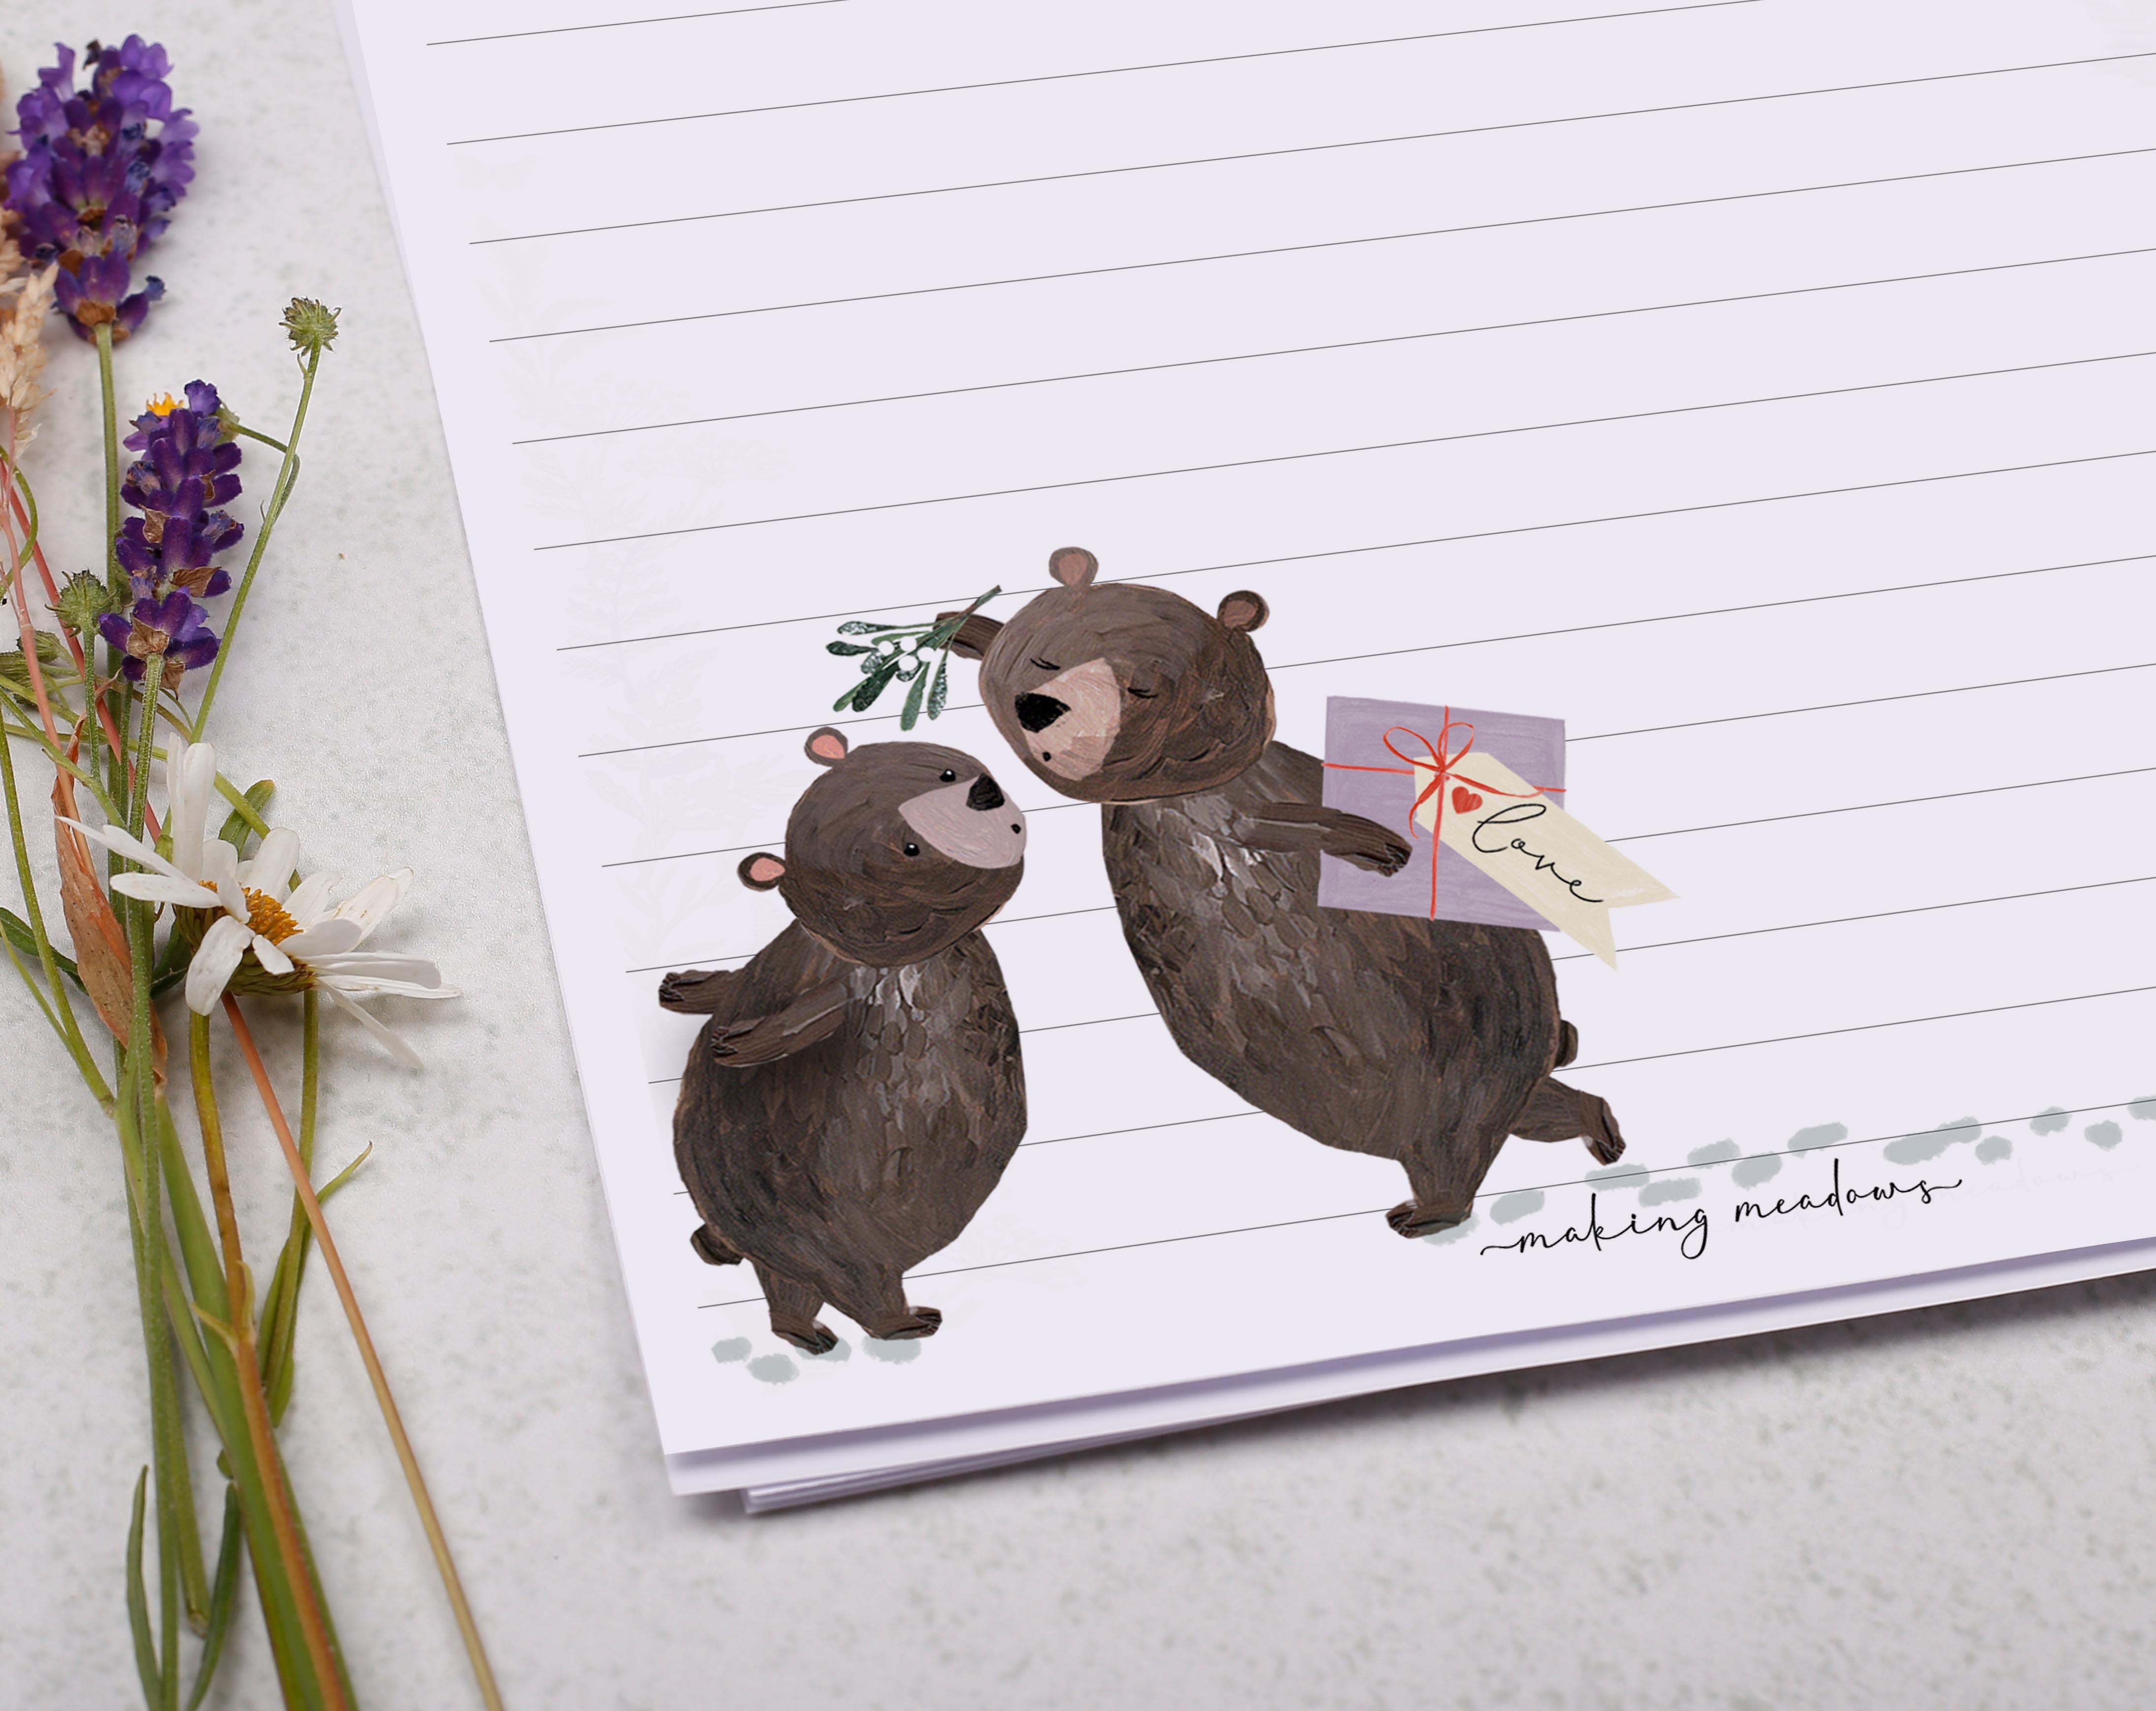 A5 writing paper with mistletoe kissing bears